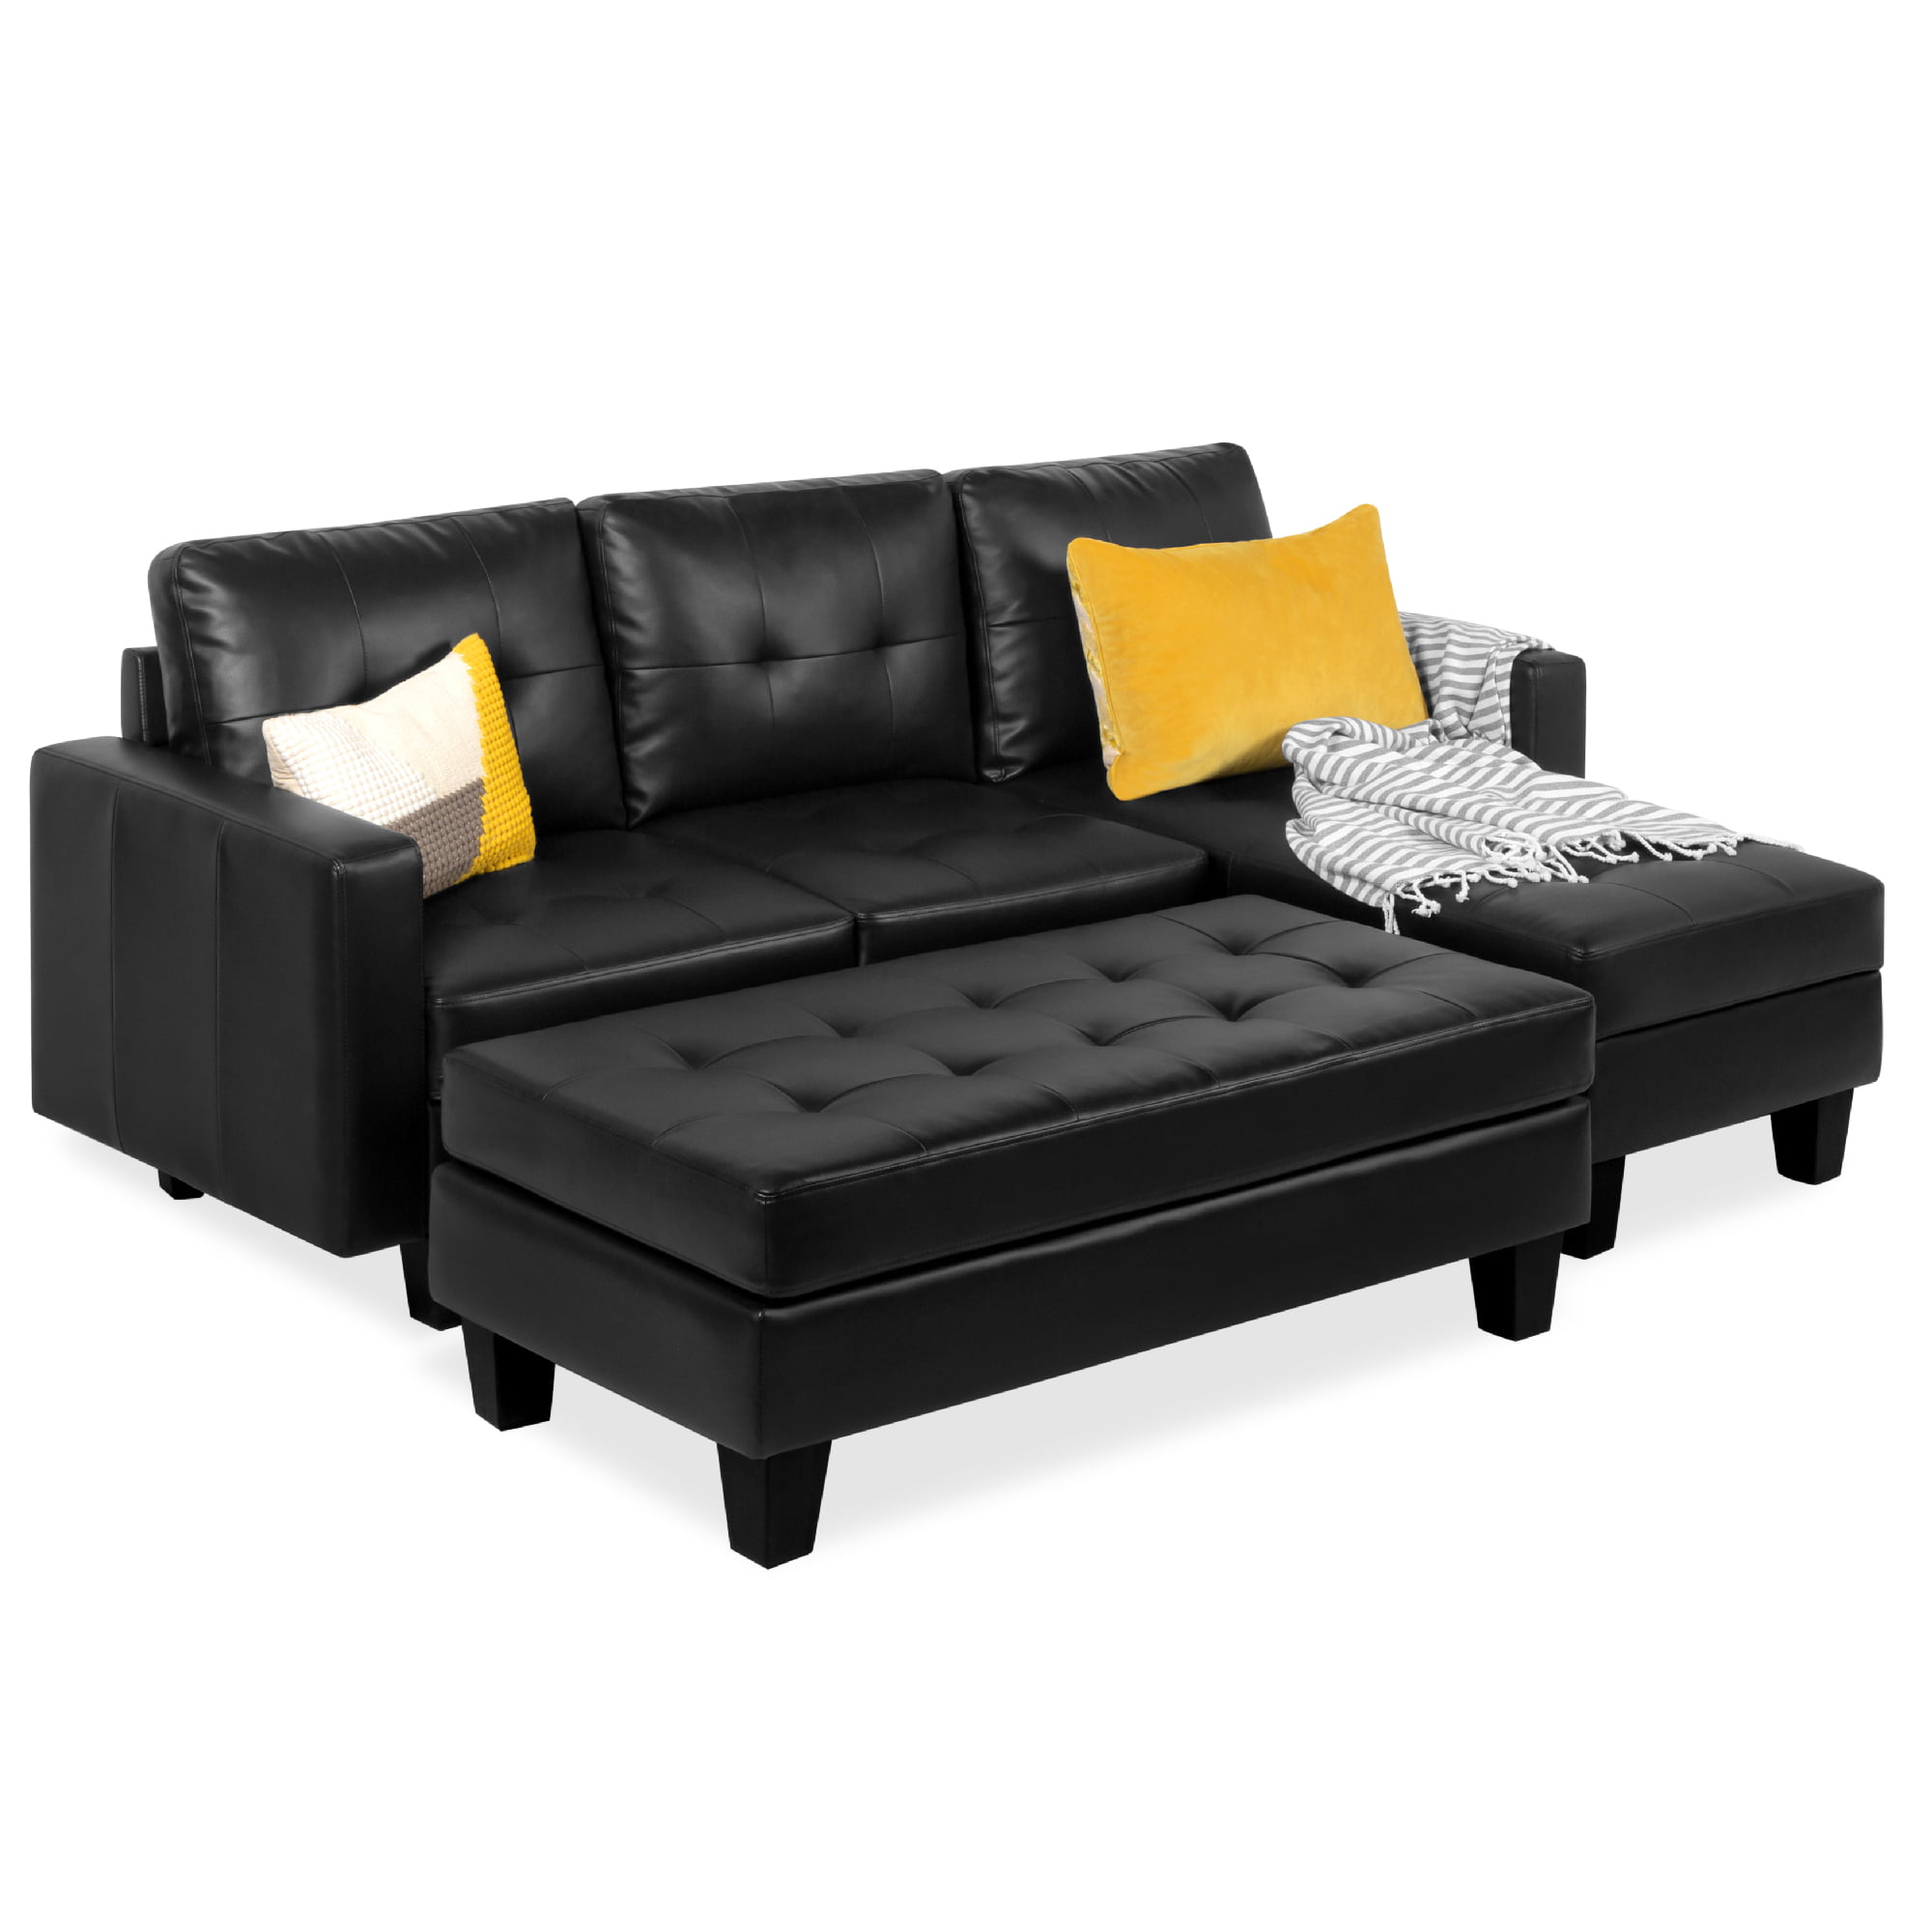 Modern Leather Sofa And Footstool for Small Space